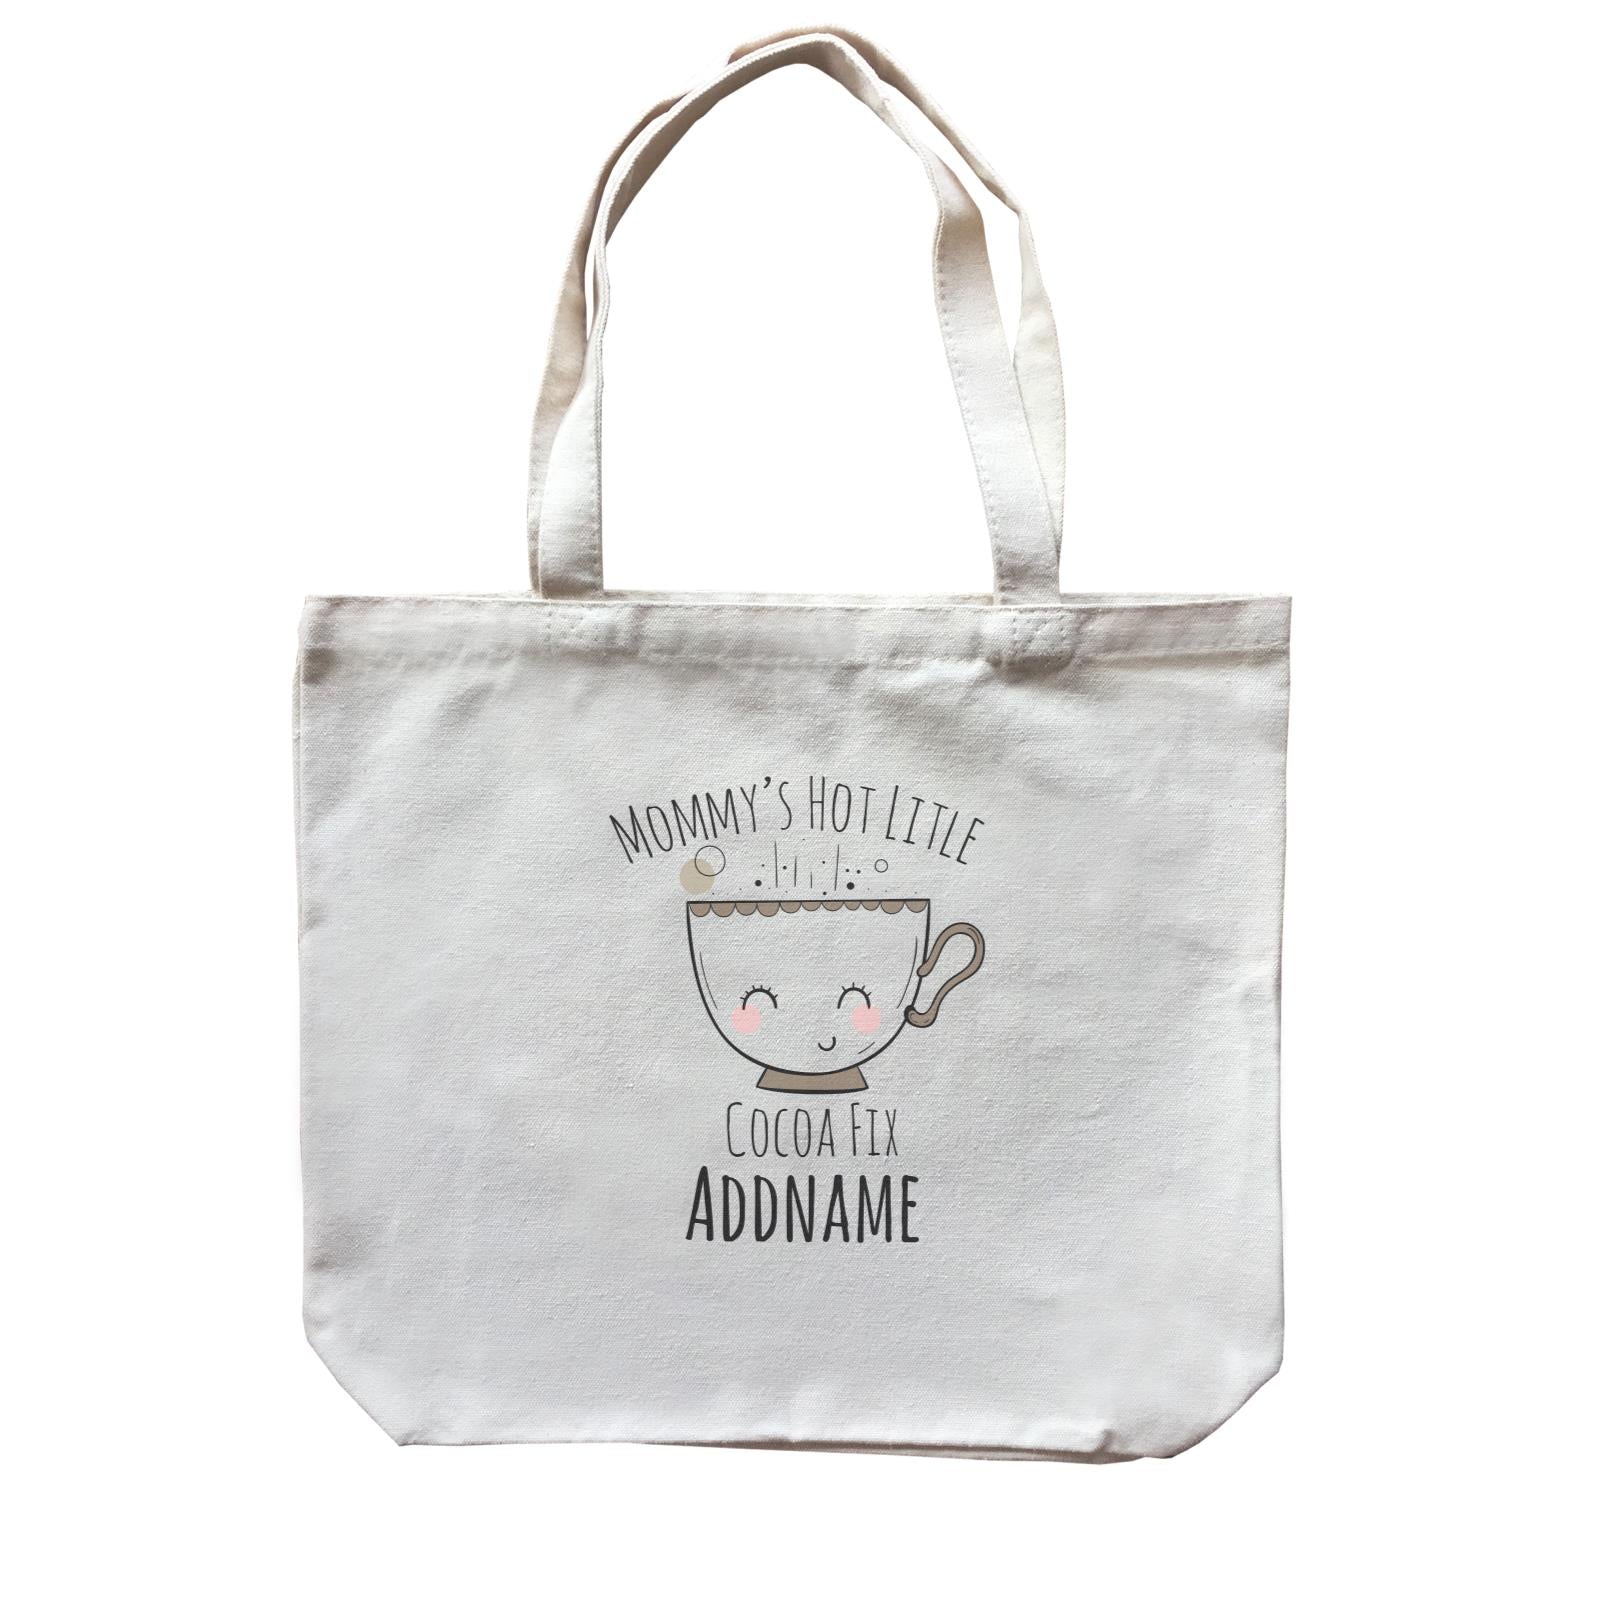 Drawn Sweet Snacks Mommy's Hot Little Cocoa Fix Addname Canvas Bag